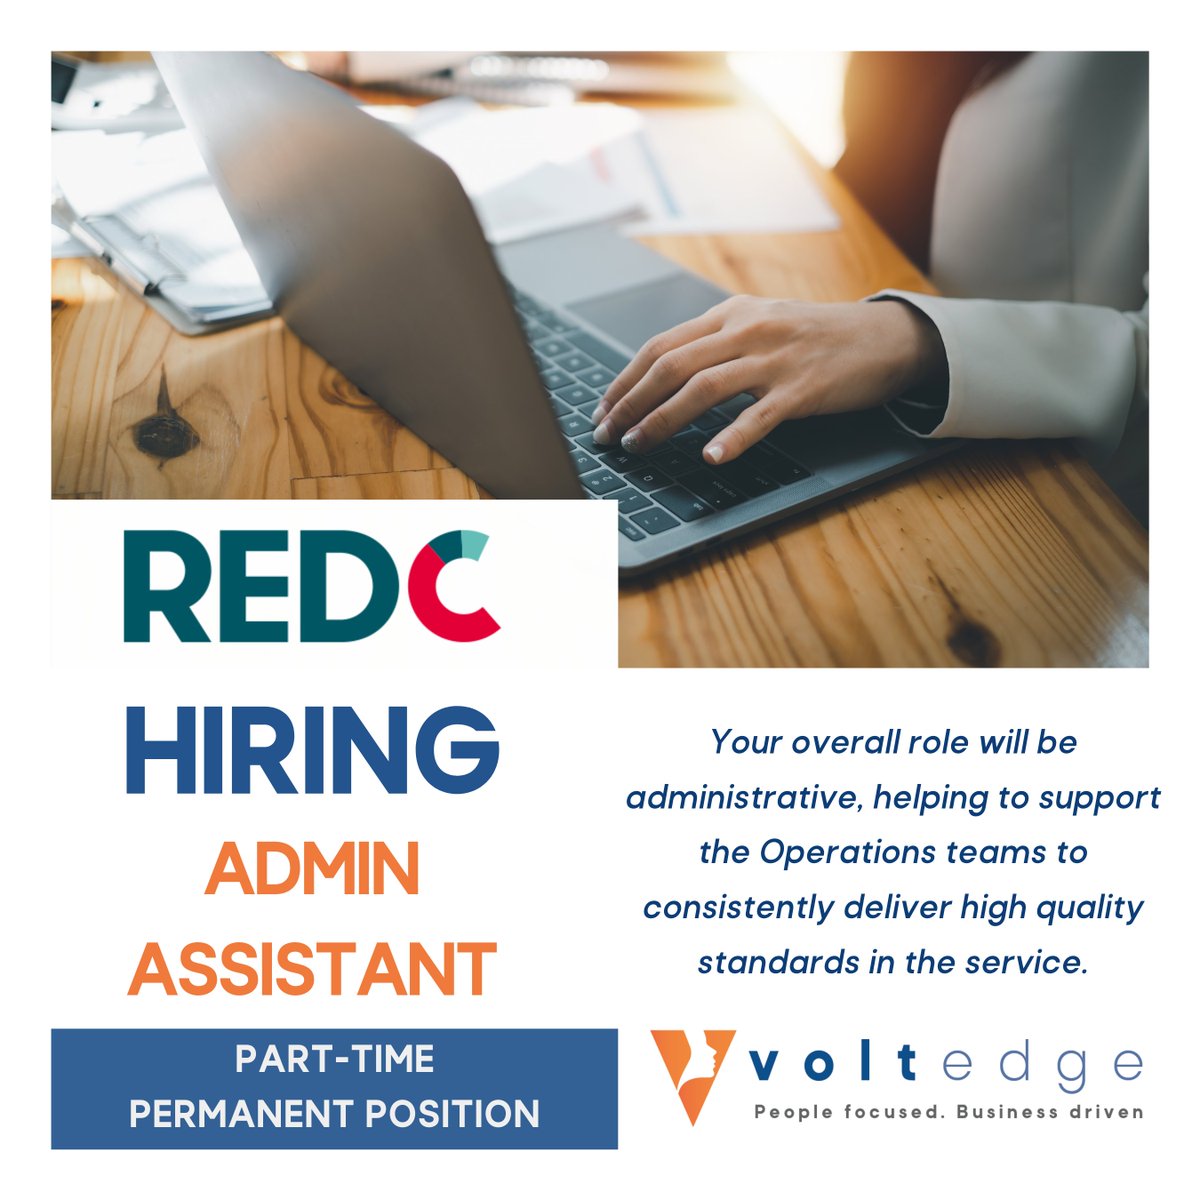 Great opportunity for a talented #Admin Assistant to help @REDCResearch keep growing. Apply today for a challenging and rewarding position in a dynamic, fast paced environment and take the next step in your career 👉 voltedge.hirehive.com/admin-assistan… #admin #career @JobFairyDublin